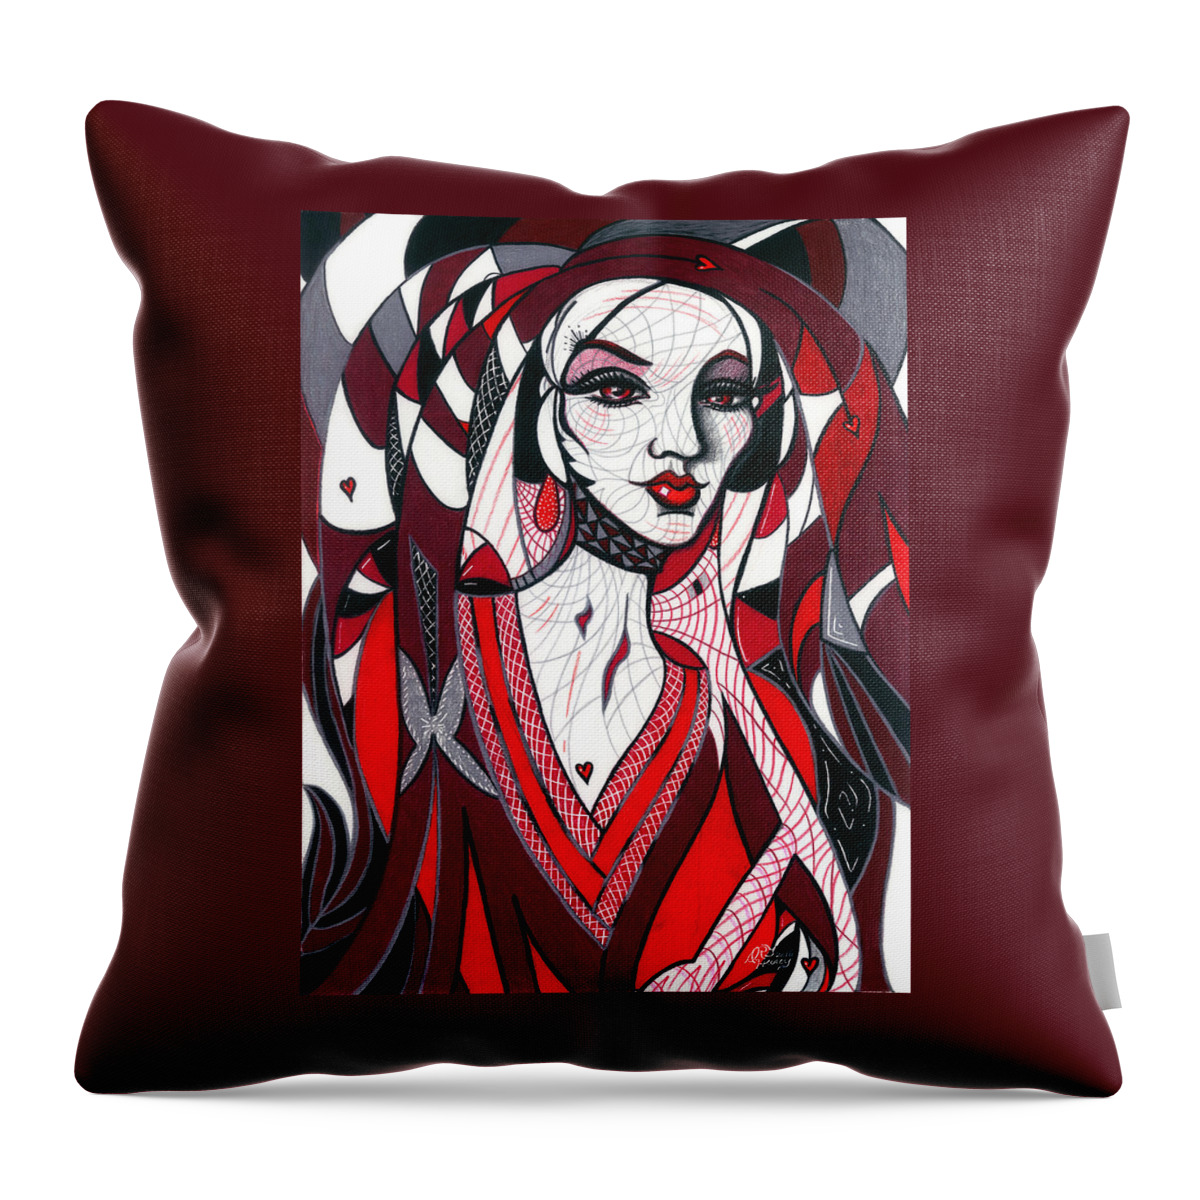 Queen Throw Pillow featuring the drawing Queen by Danielle R T Haney